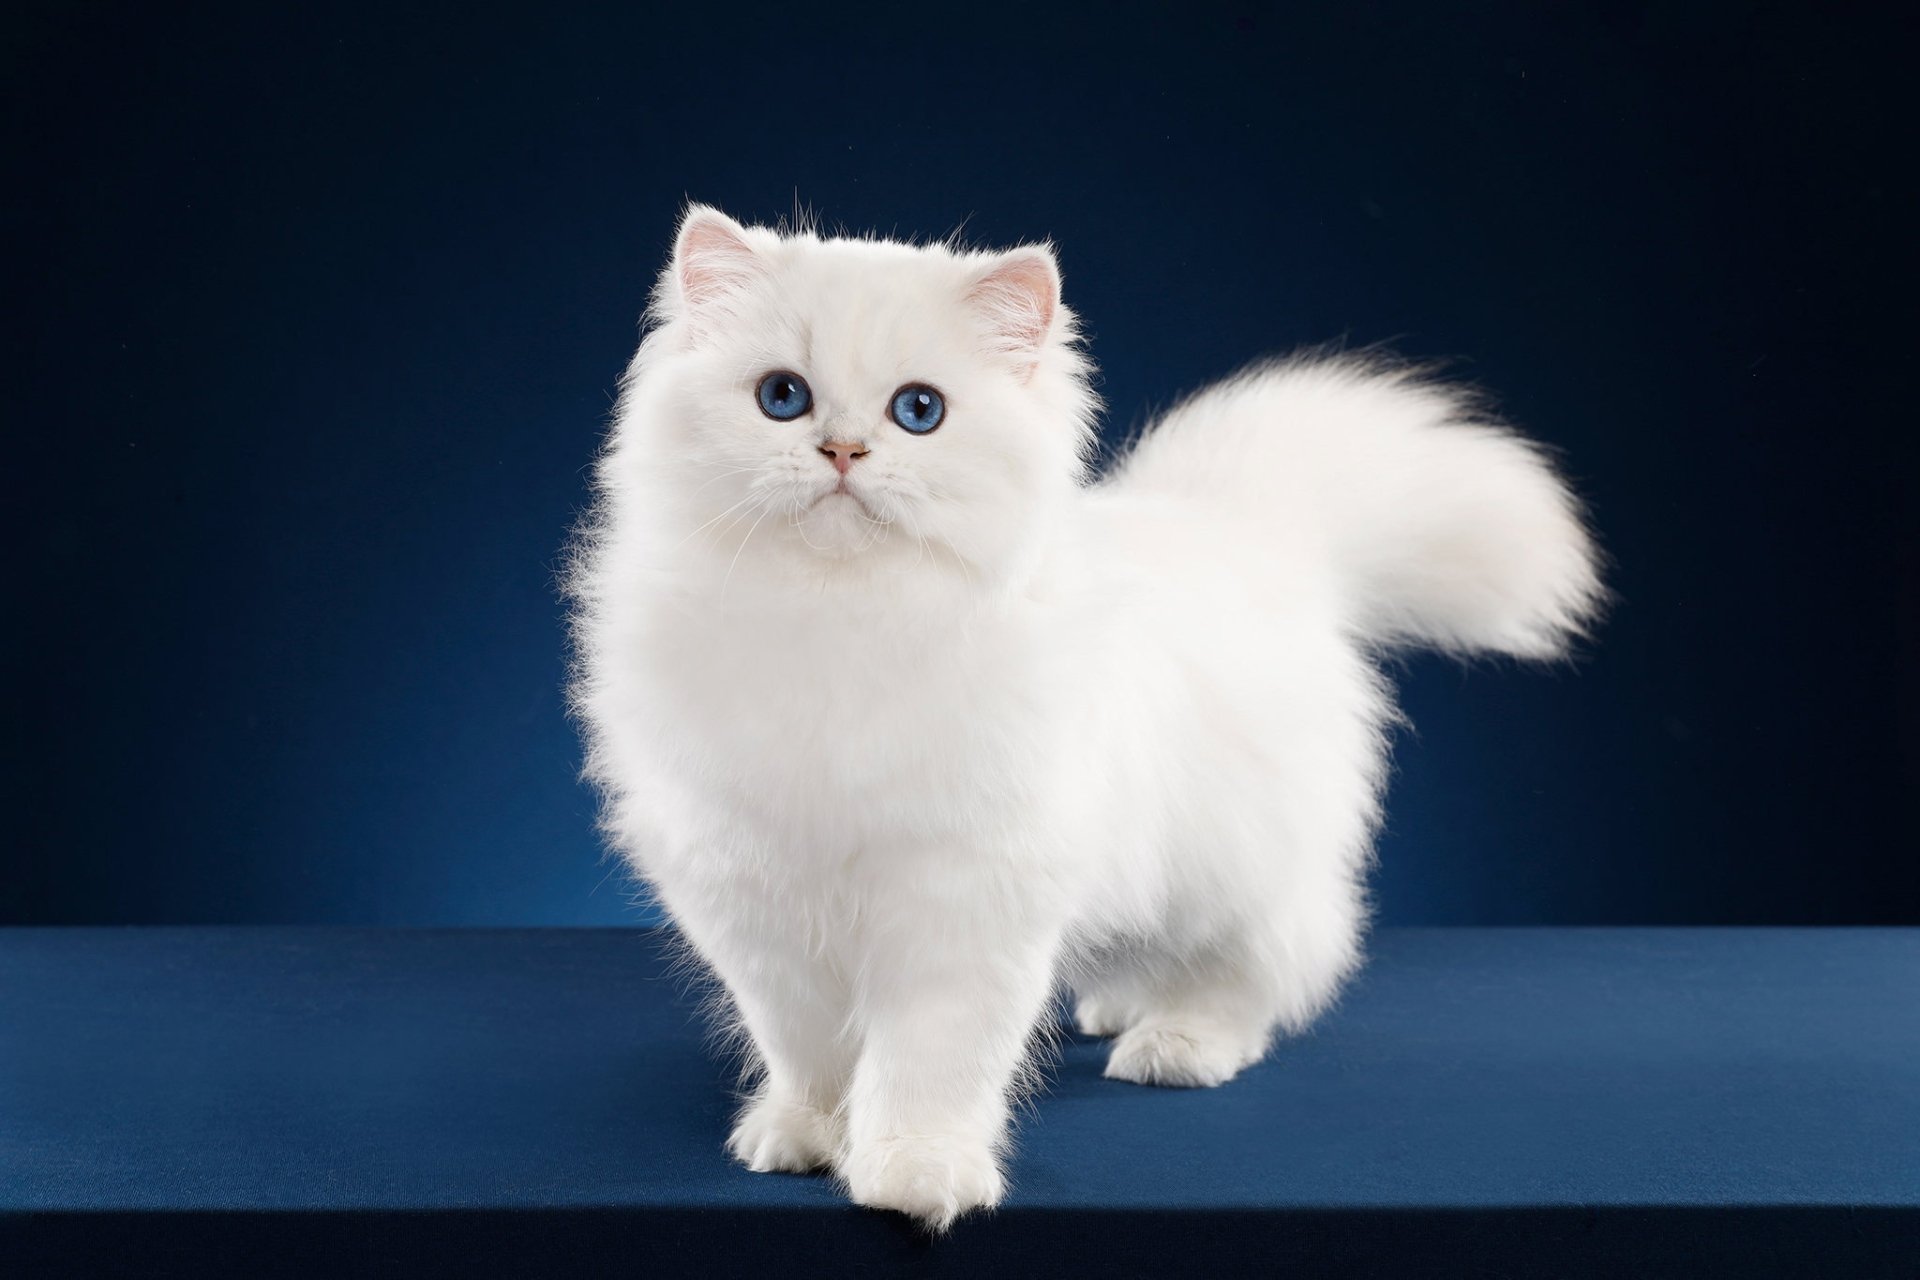 White fluffy cat HD Wallpaper Background Image 2048x1365 ID